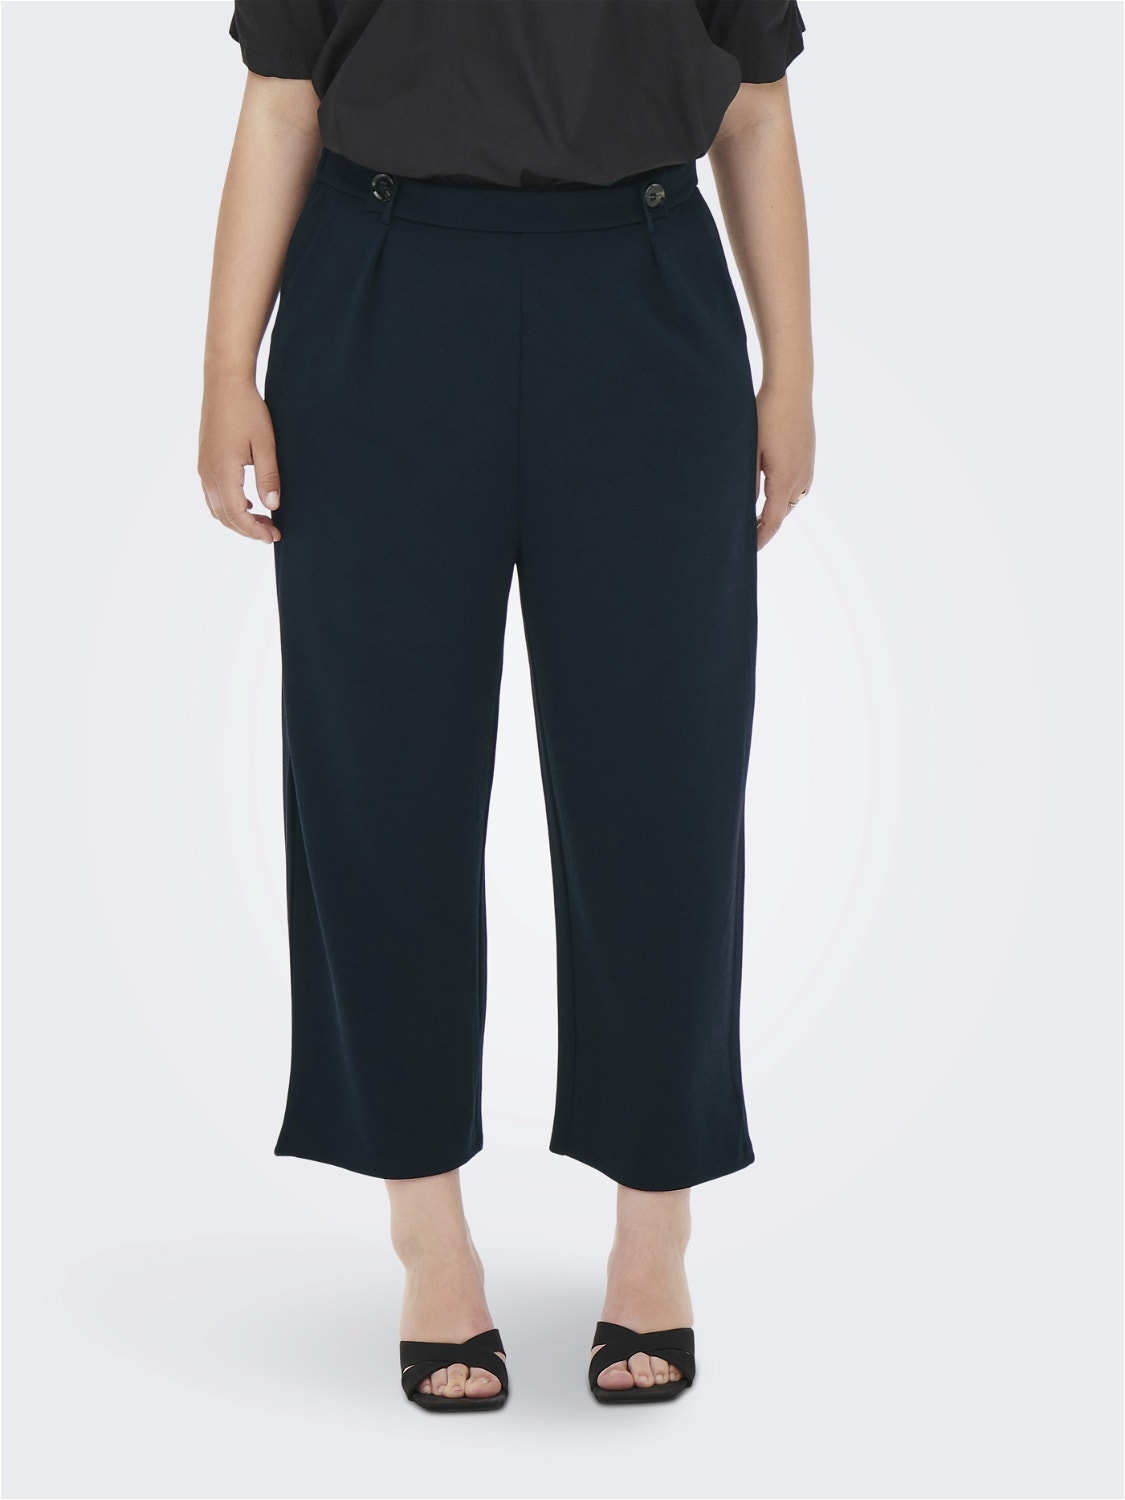 Curvy culotte Trousers | Dark Blue | ONLY®